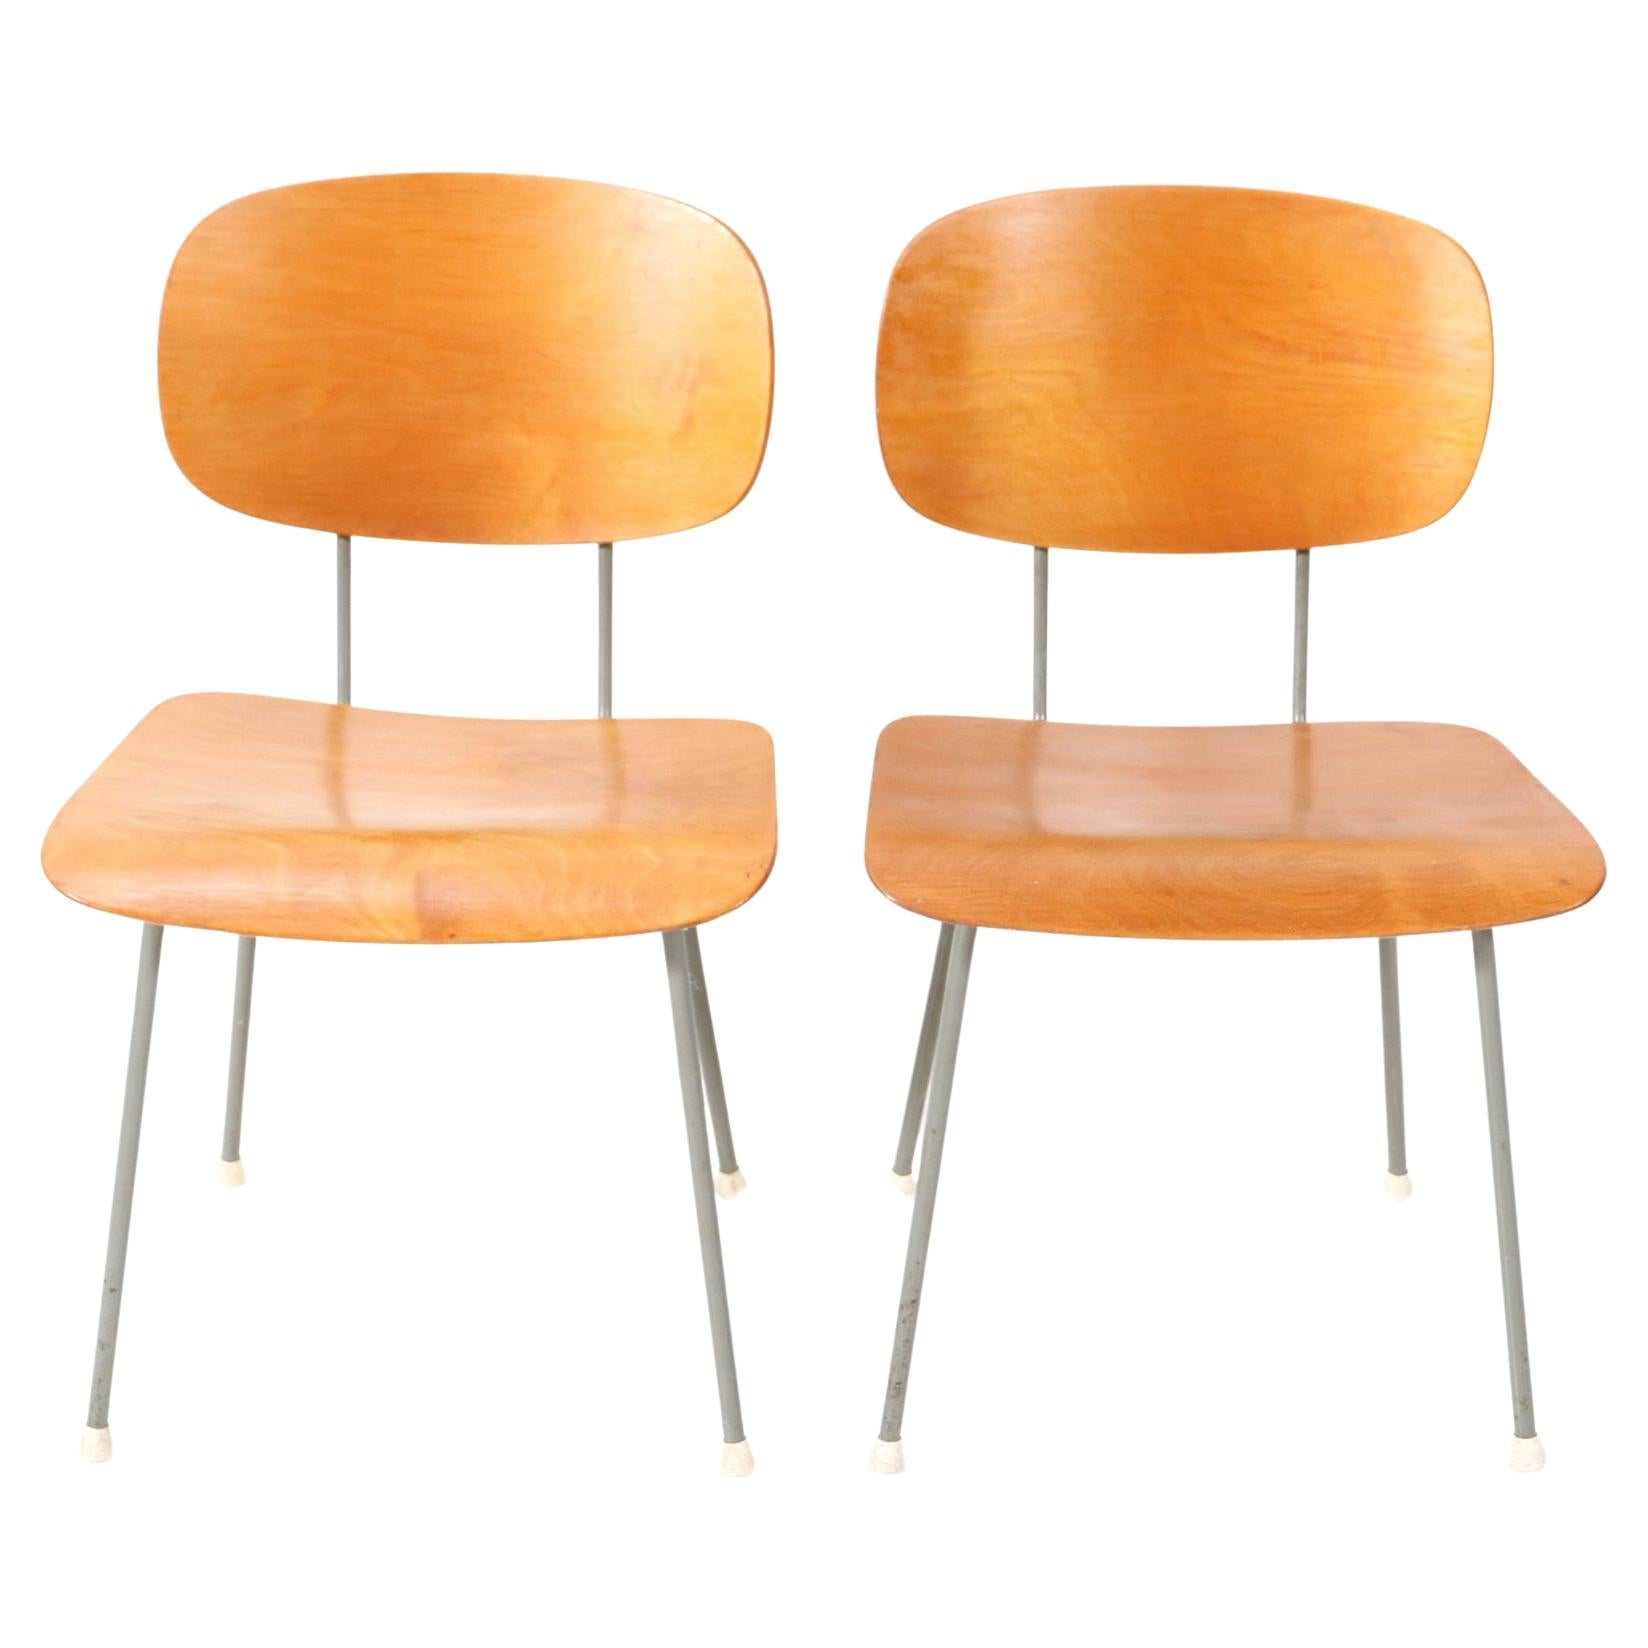 Pair of Mid-Century Modern Model 116 Side Chairs by Wim Rietveld for Gispen